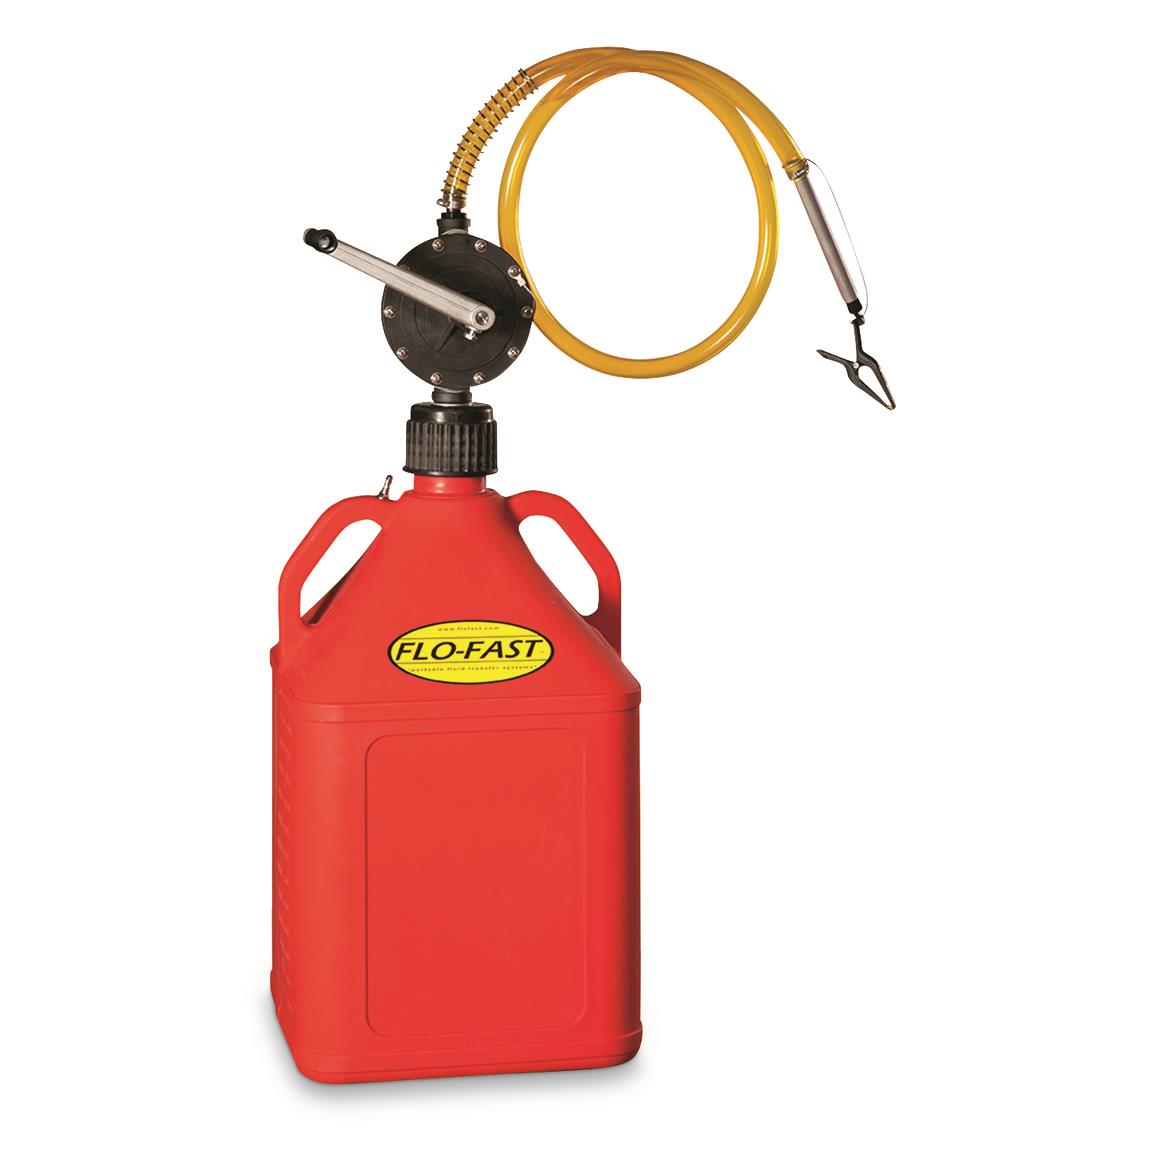 FLO-FAST 15 Gallon Fuel Container with Pro Model Fuel Pump, Red - for Gasoline